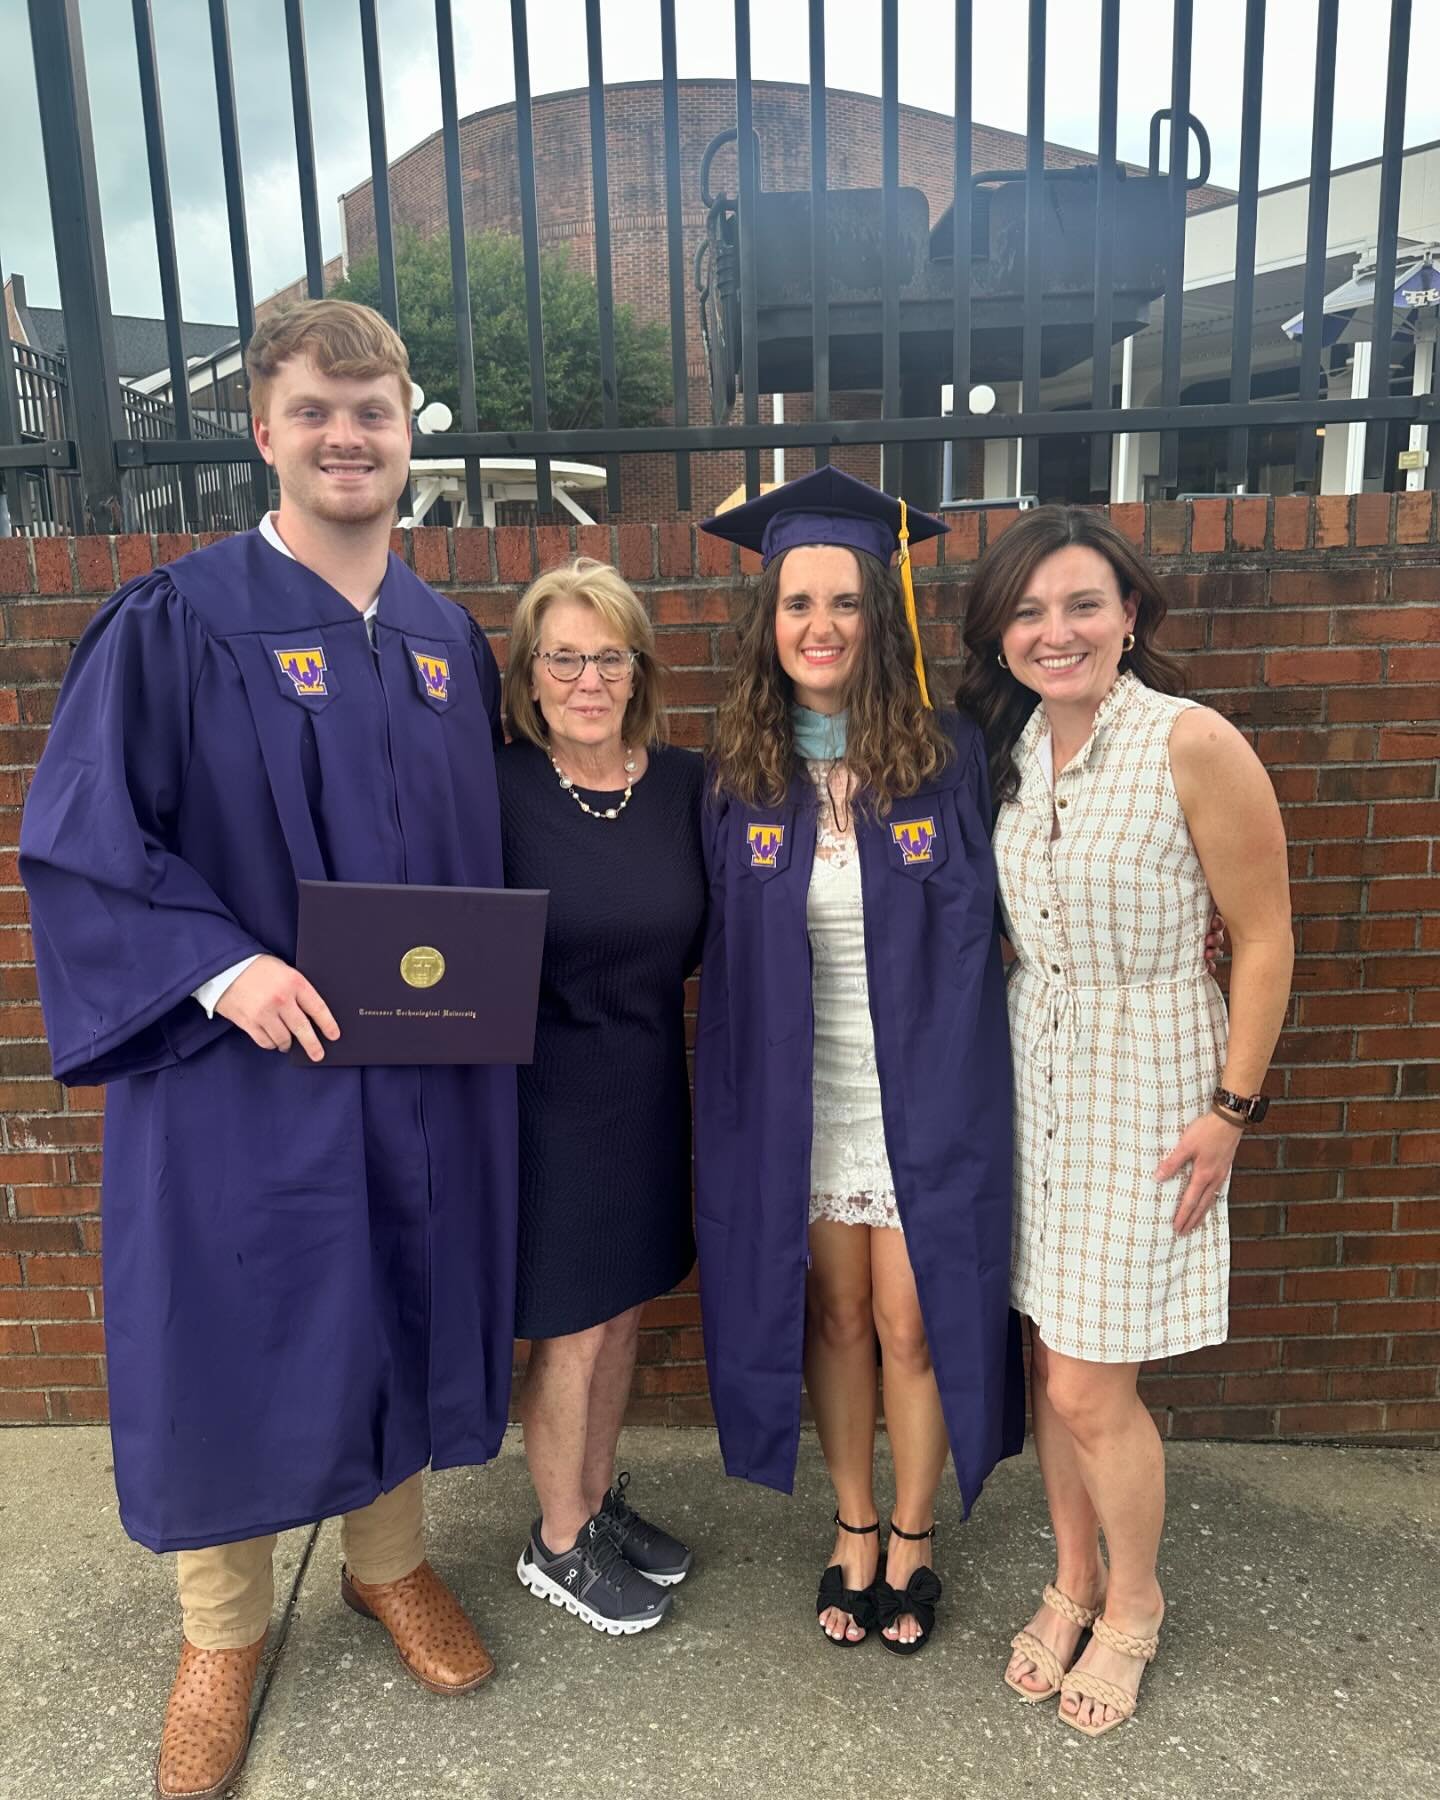 Congratulations to my niece and nephew! @courtneysidoli graduated with her Ed.S. and is now a school psychologist! @hhanger03 graduated cum laude with a B.S. in physical education. I&rsquo;m so proud of you both! 👏🏻💕🥳